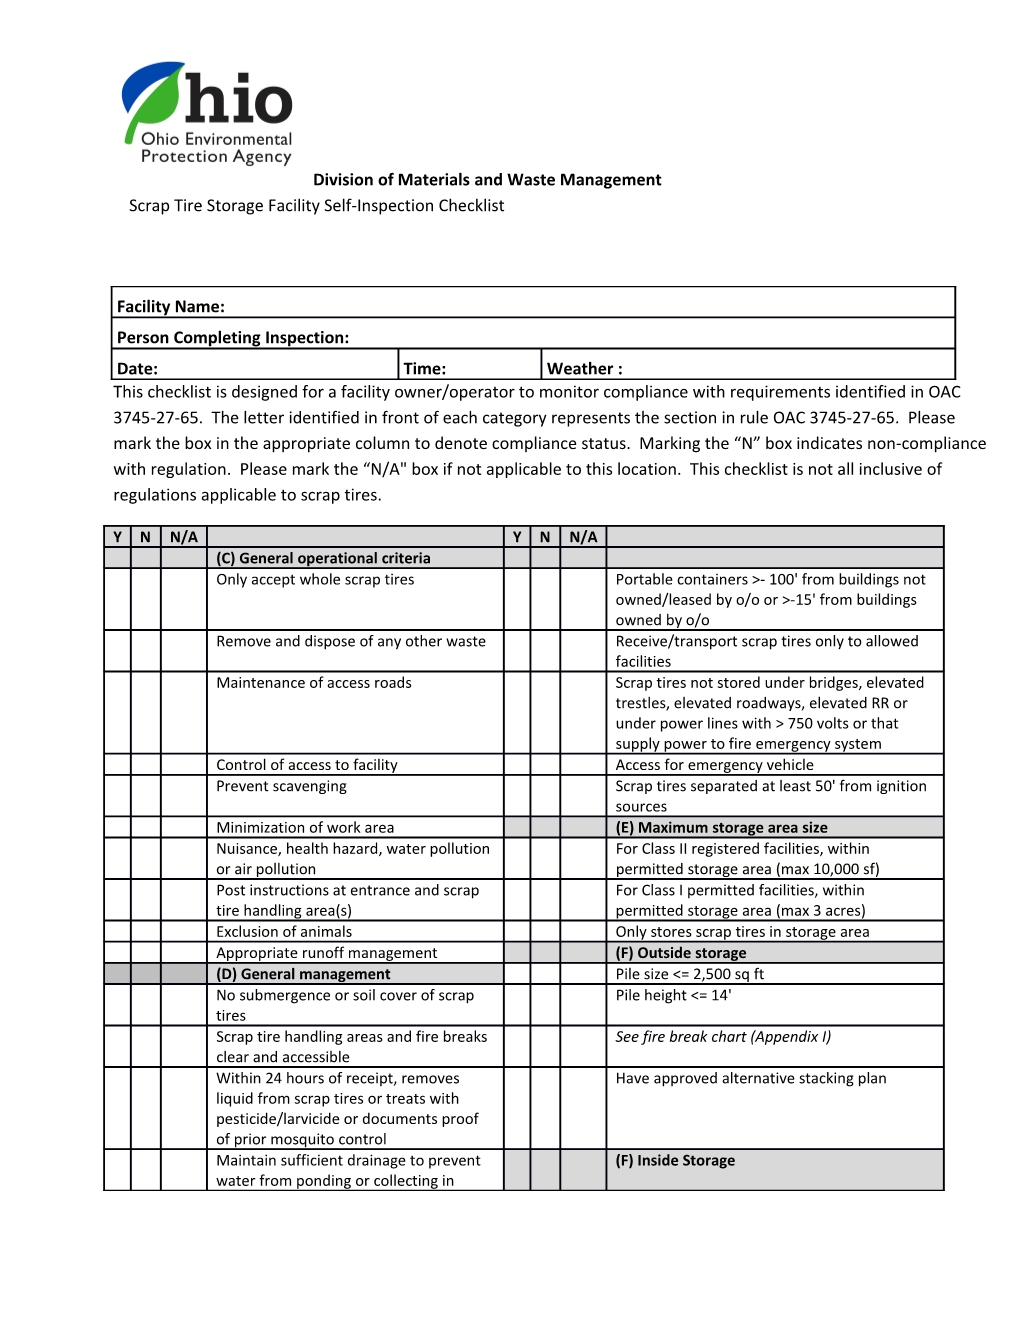 This Checklist Is Designed for a Facility Owner/Operator to Monitor Compliance with Requirements